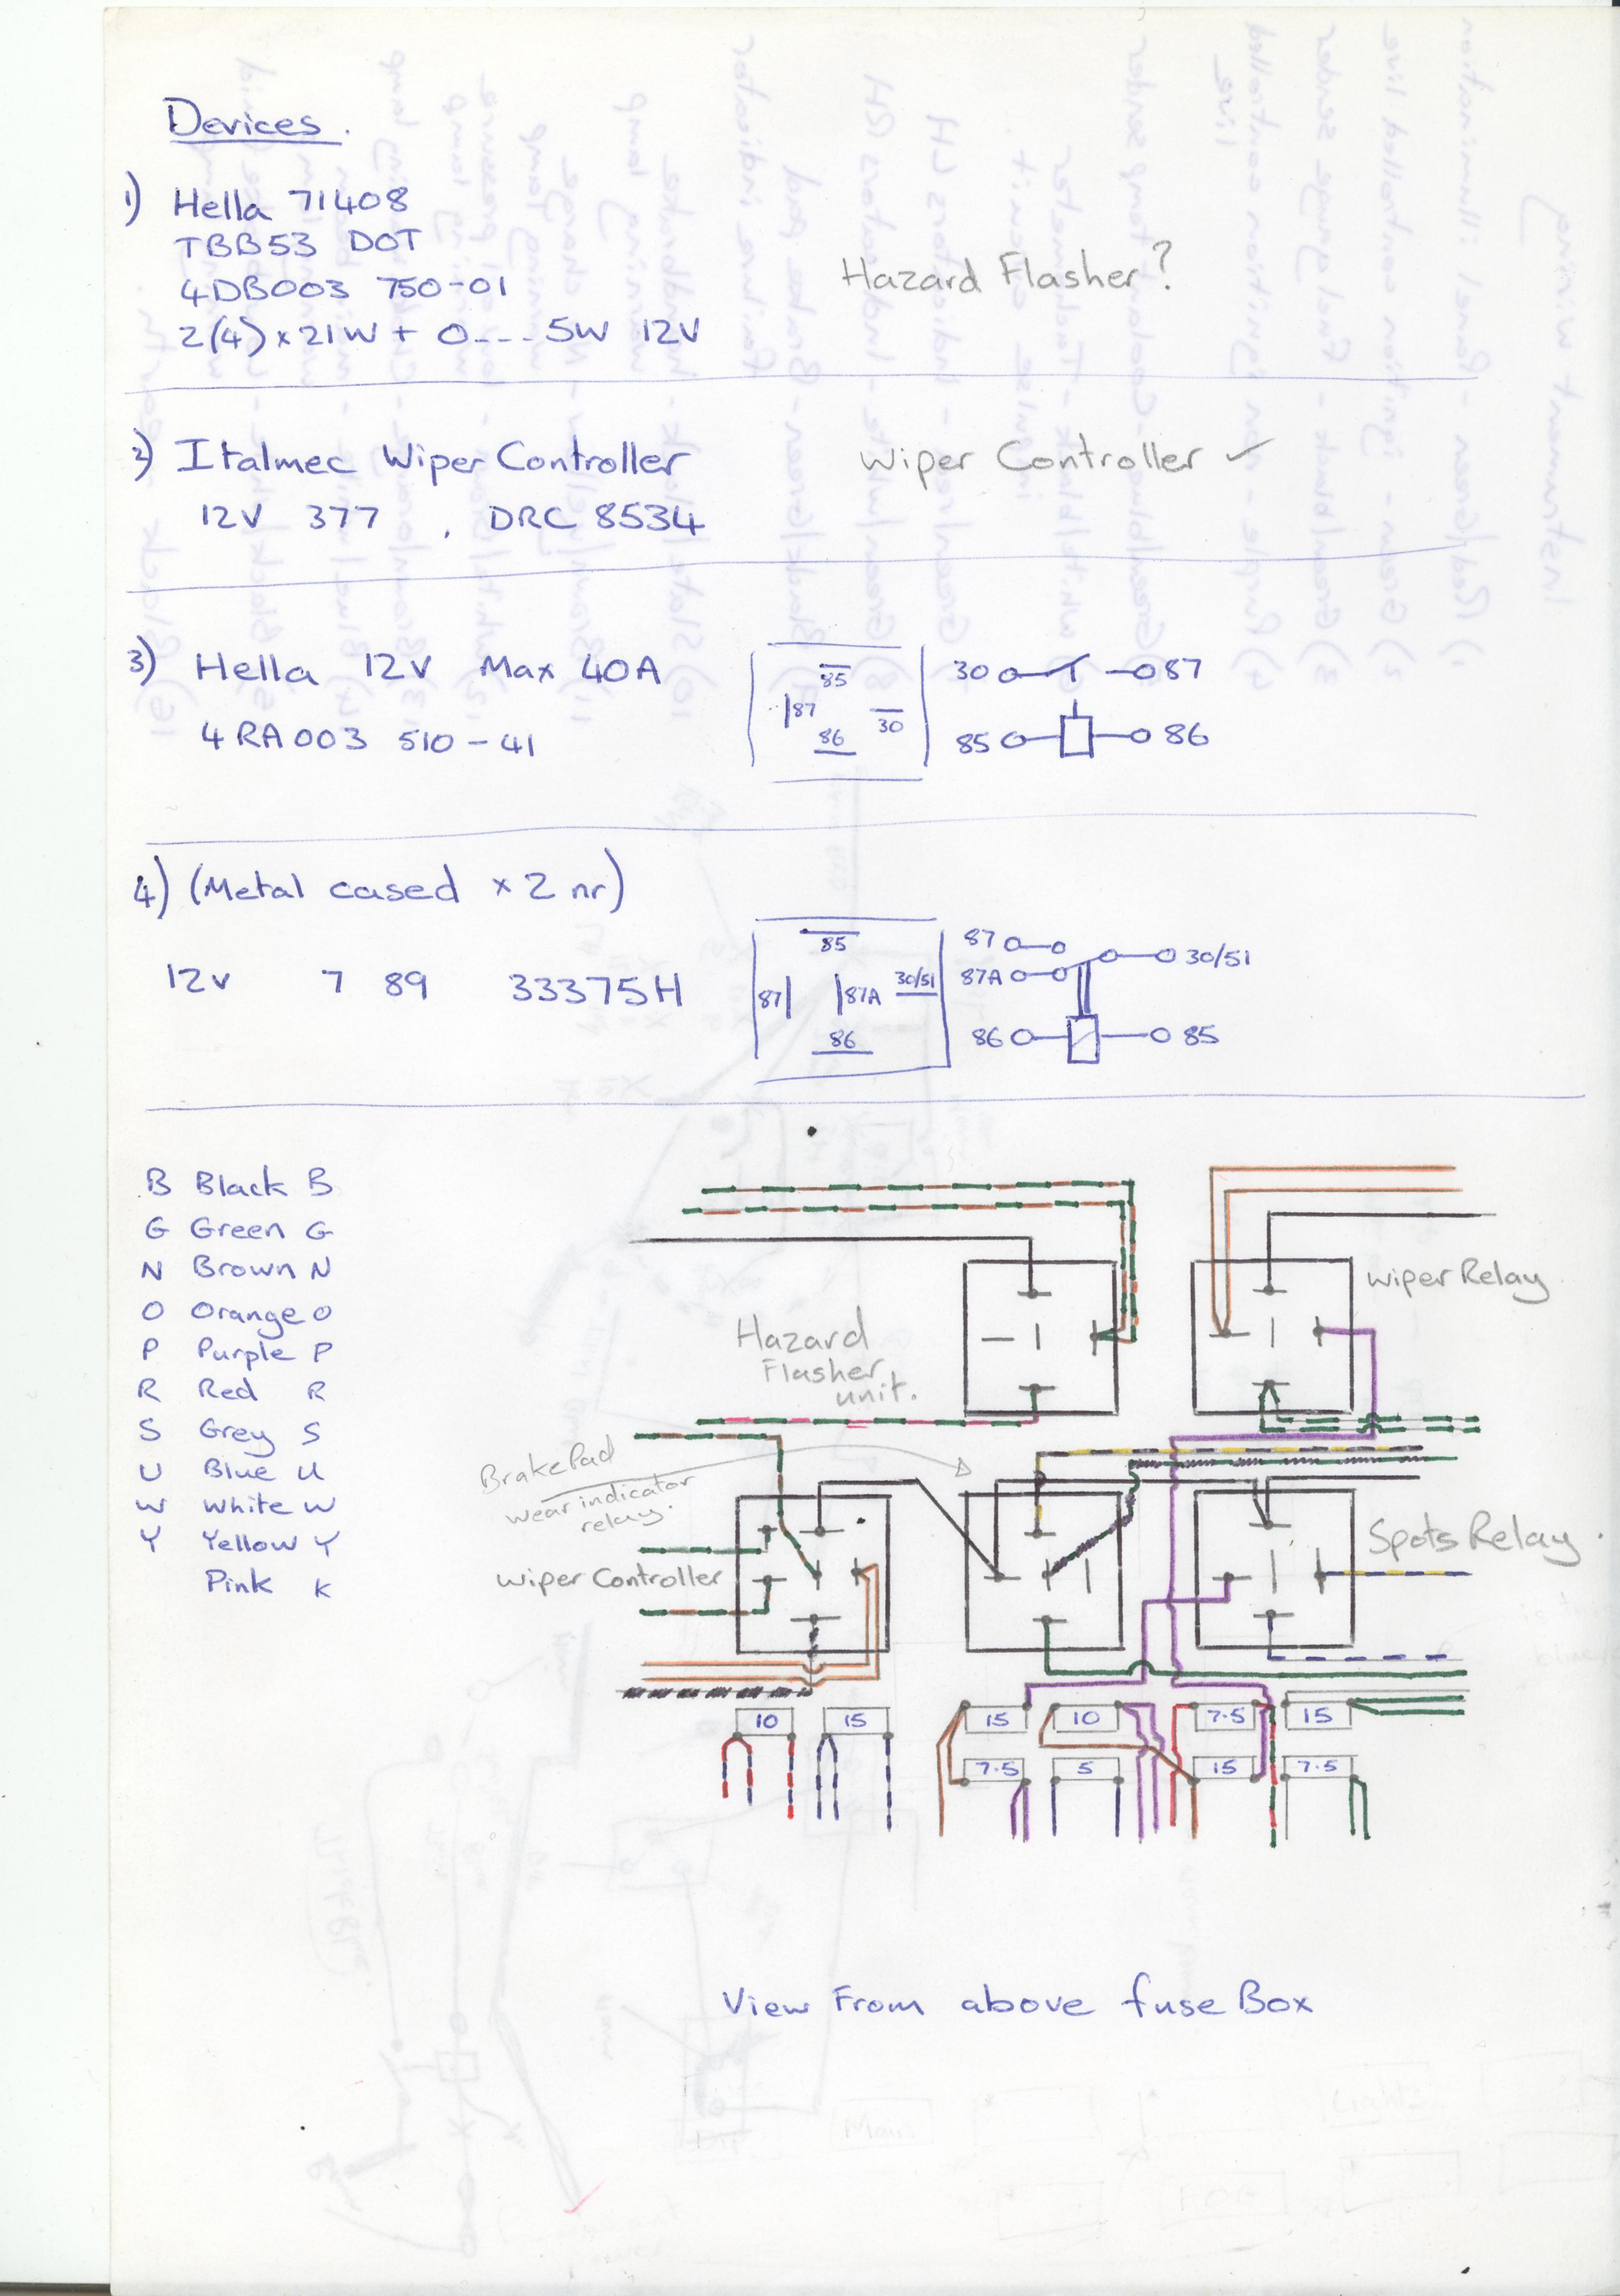 Gold Coupe Relays And Fuse Wiring 1989.jpg